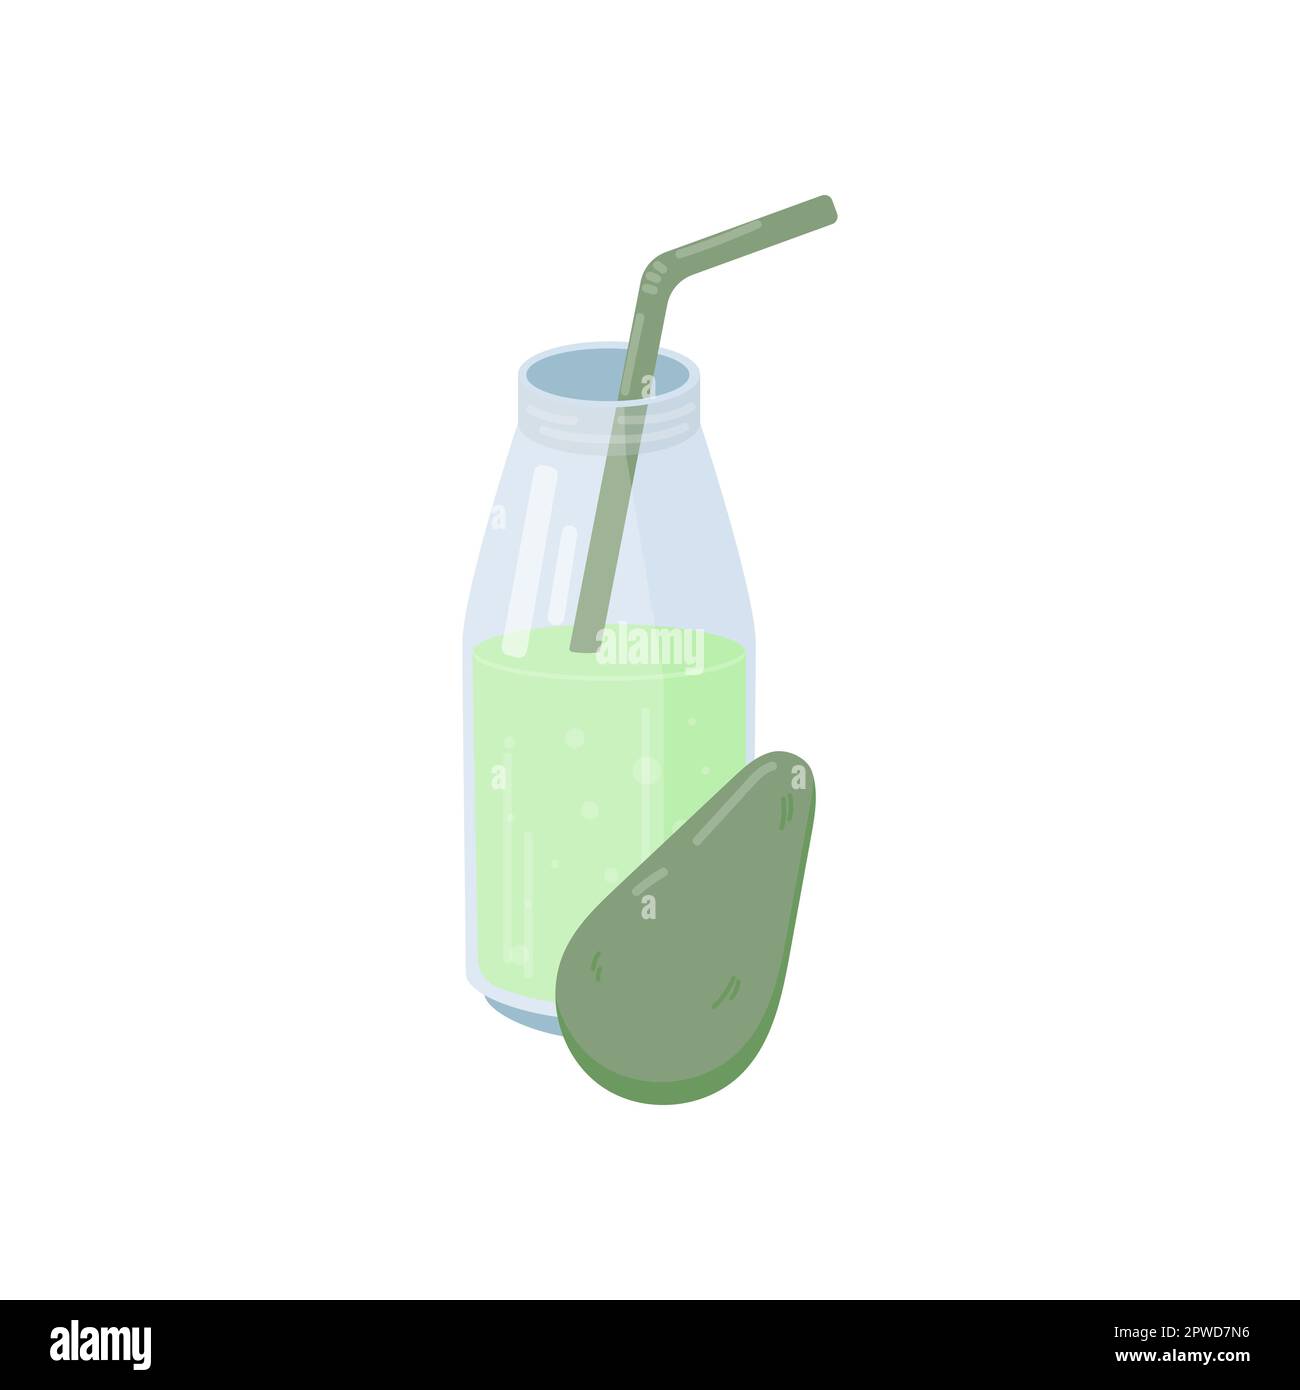 https://c8.alamy.com/comp/2PWD7N6/fresh-smoothie-or-juice-in-bottle-isolated-on-white-background-2PWD7N6.jpg